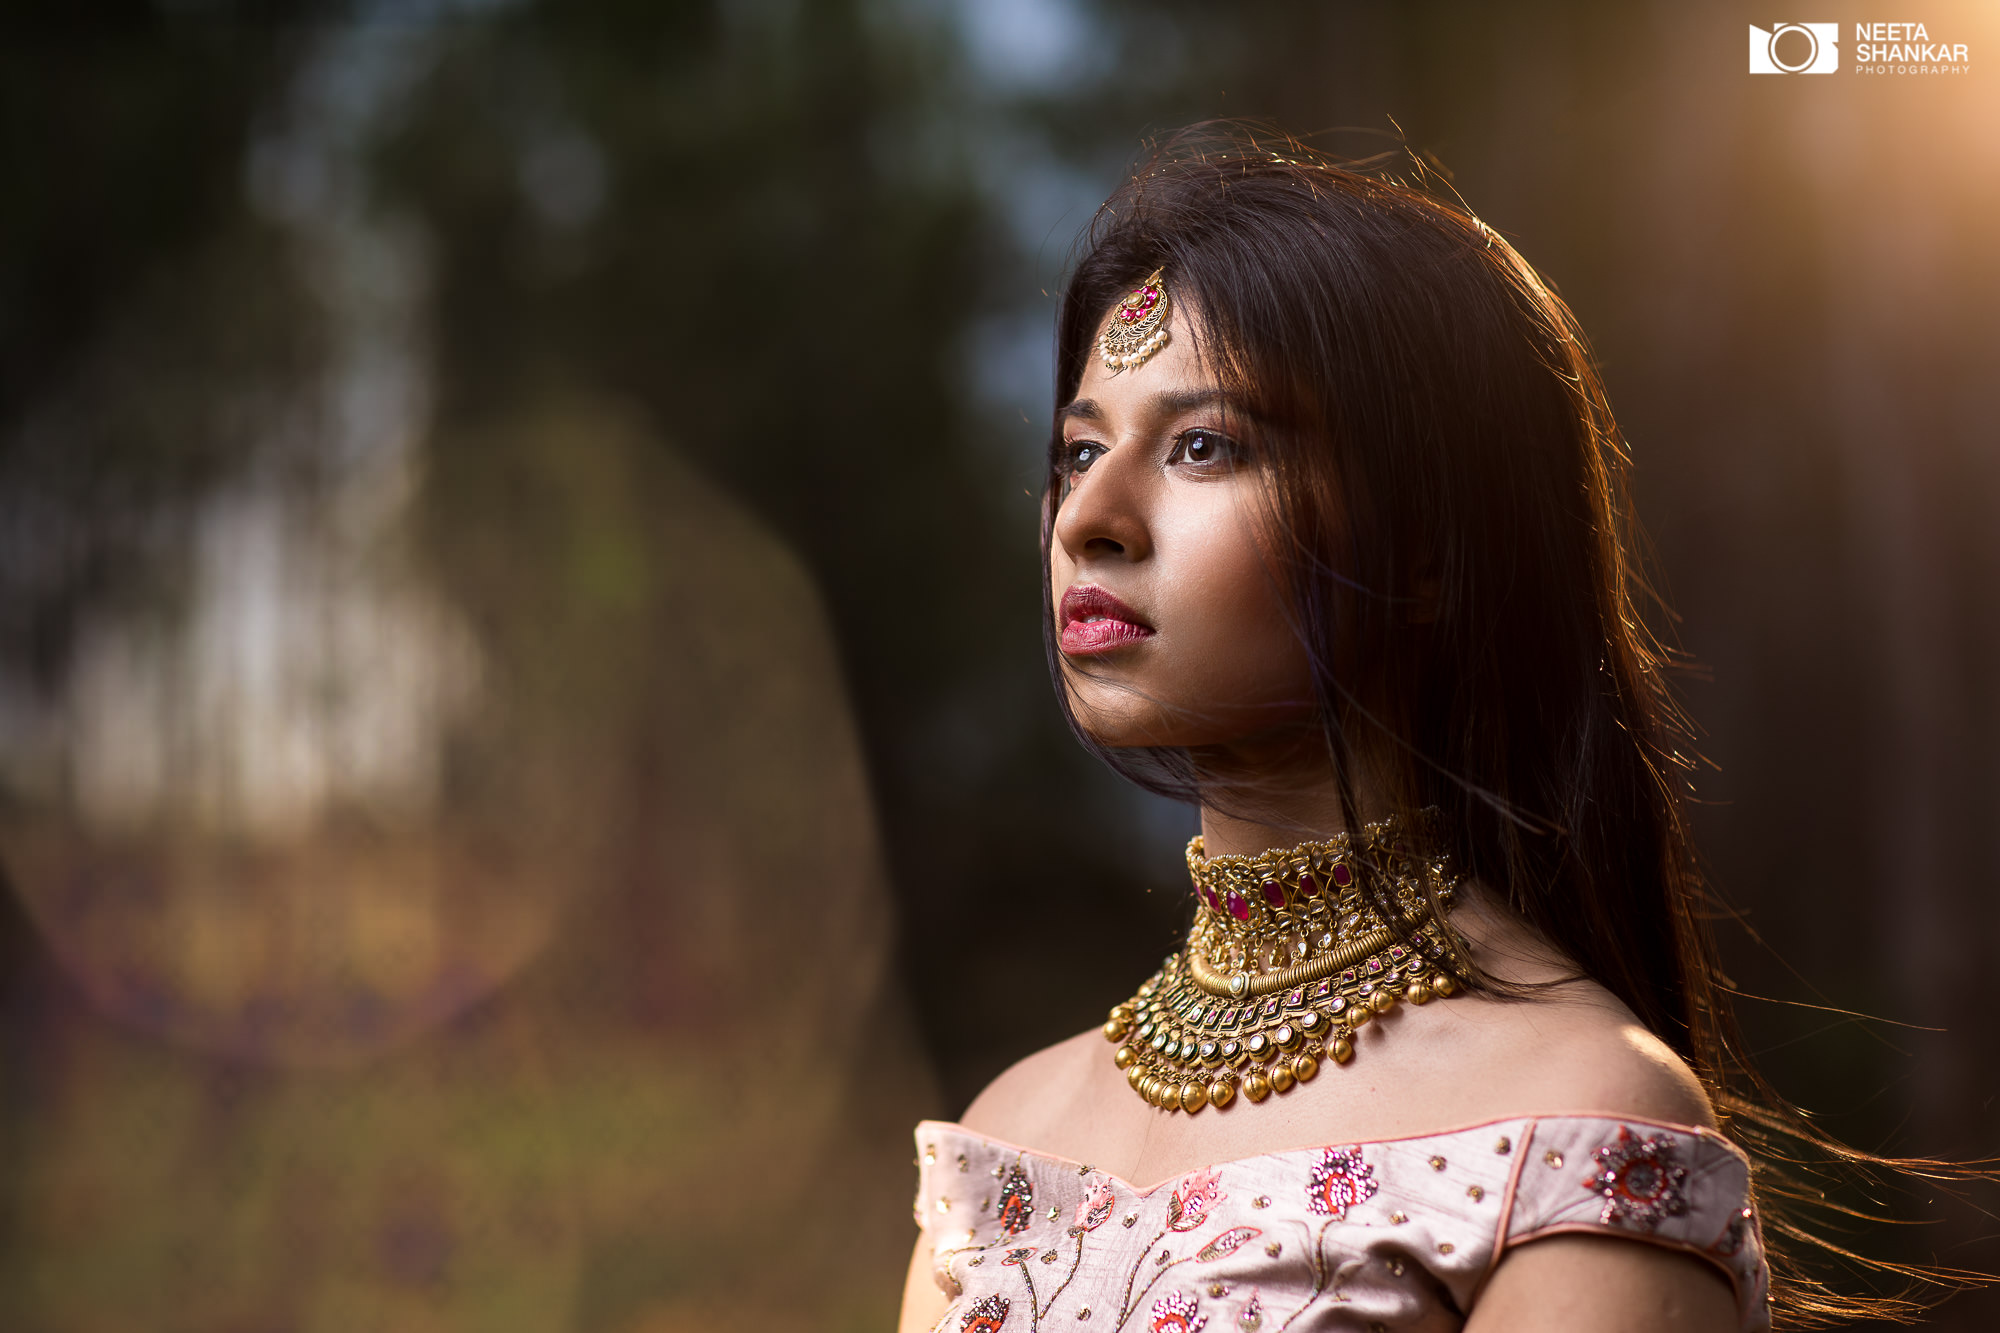 Neeta-Shankar-Photography-Godox-AD600Pro-AD600-sample-images-review-first-impressions